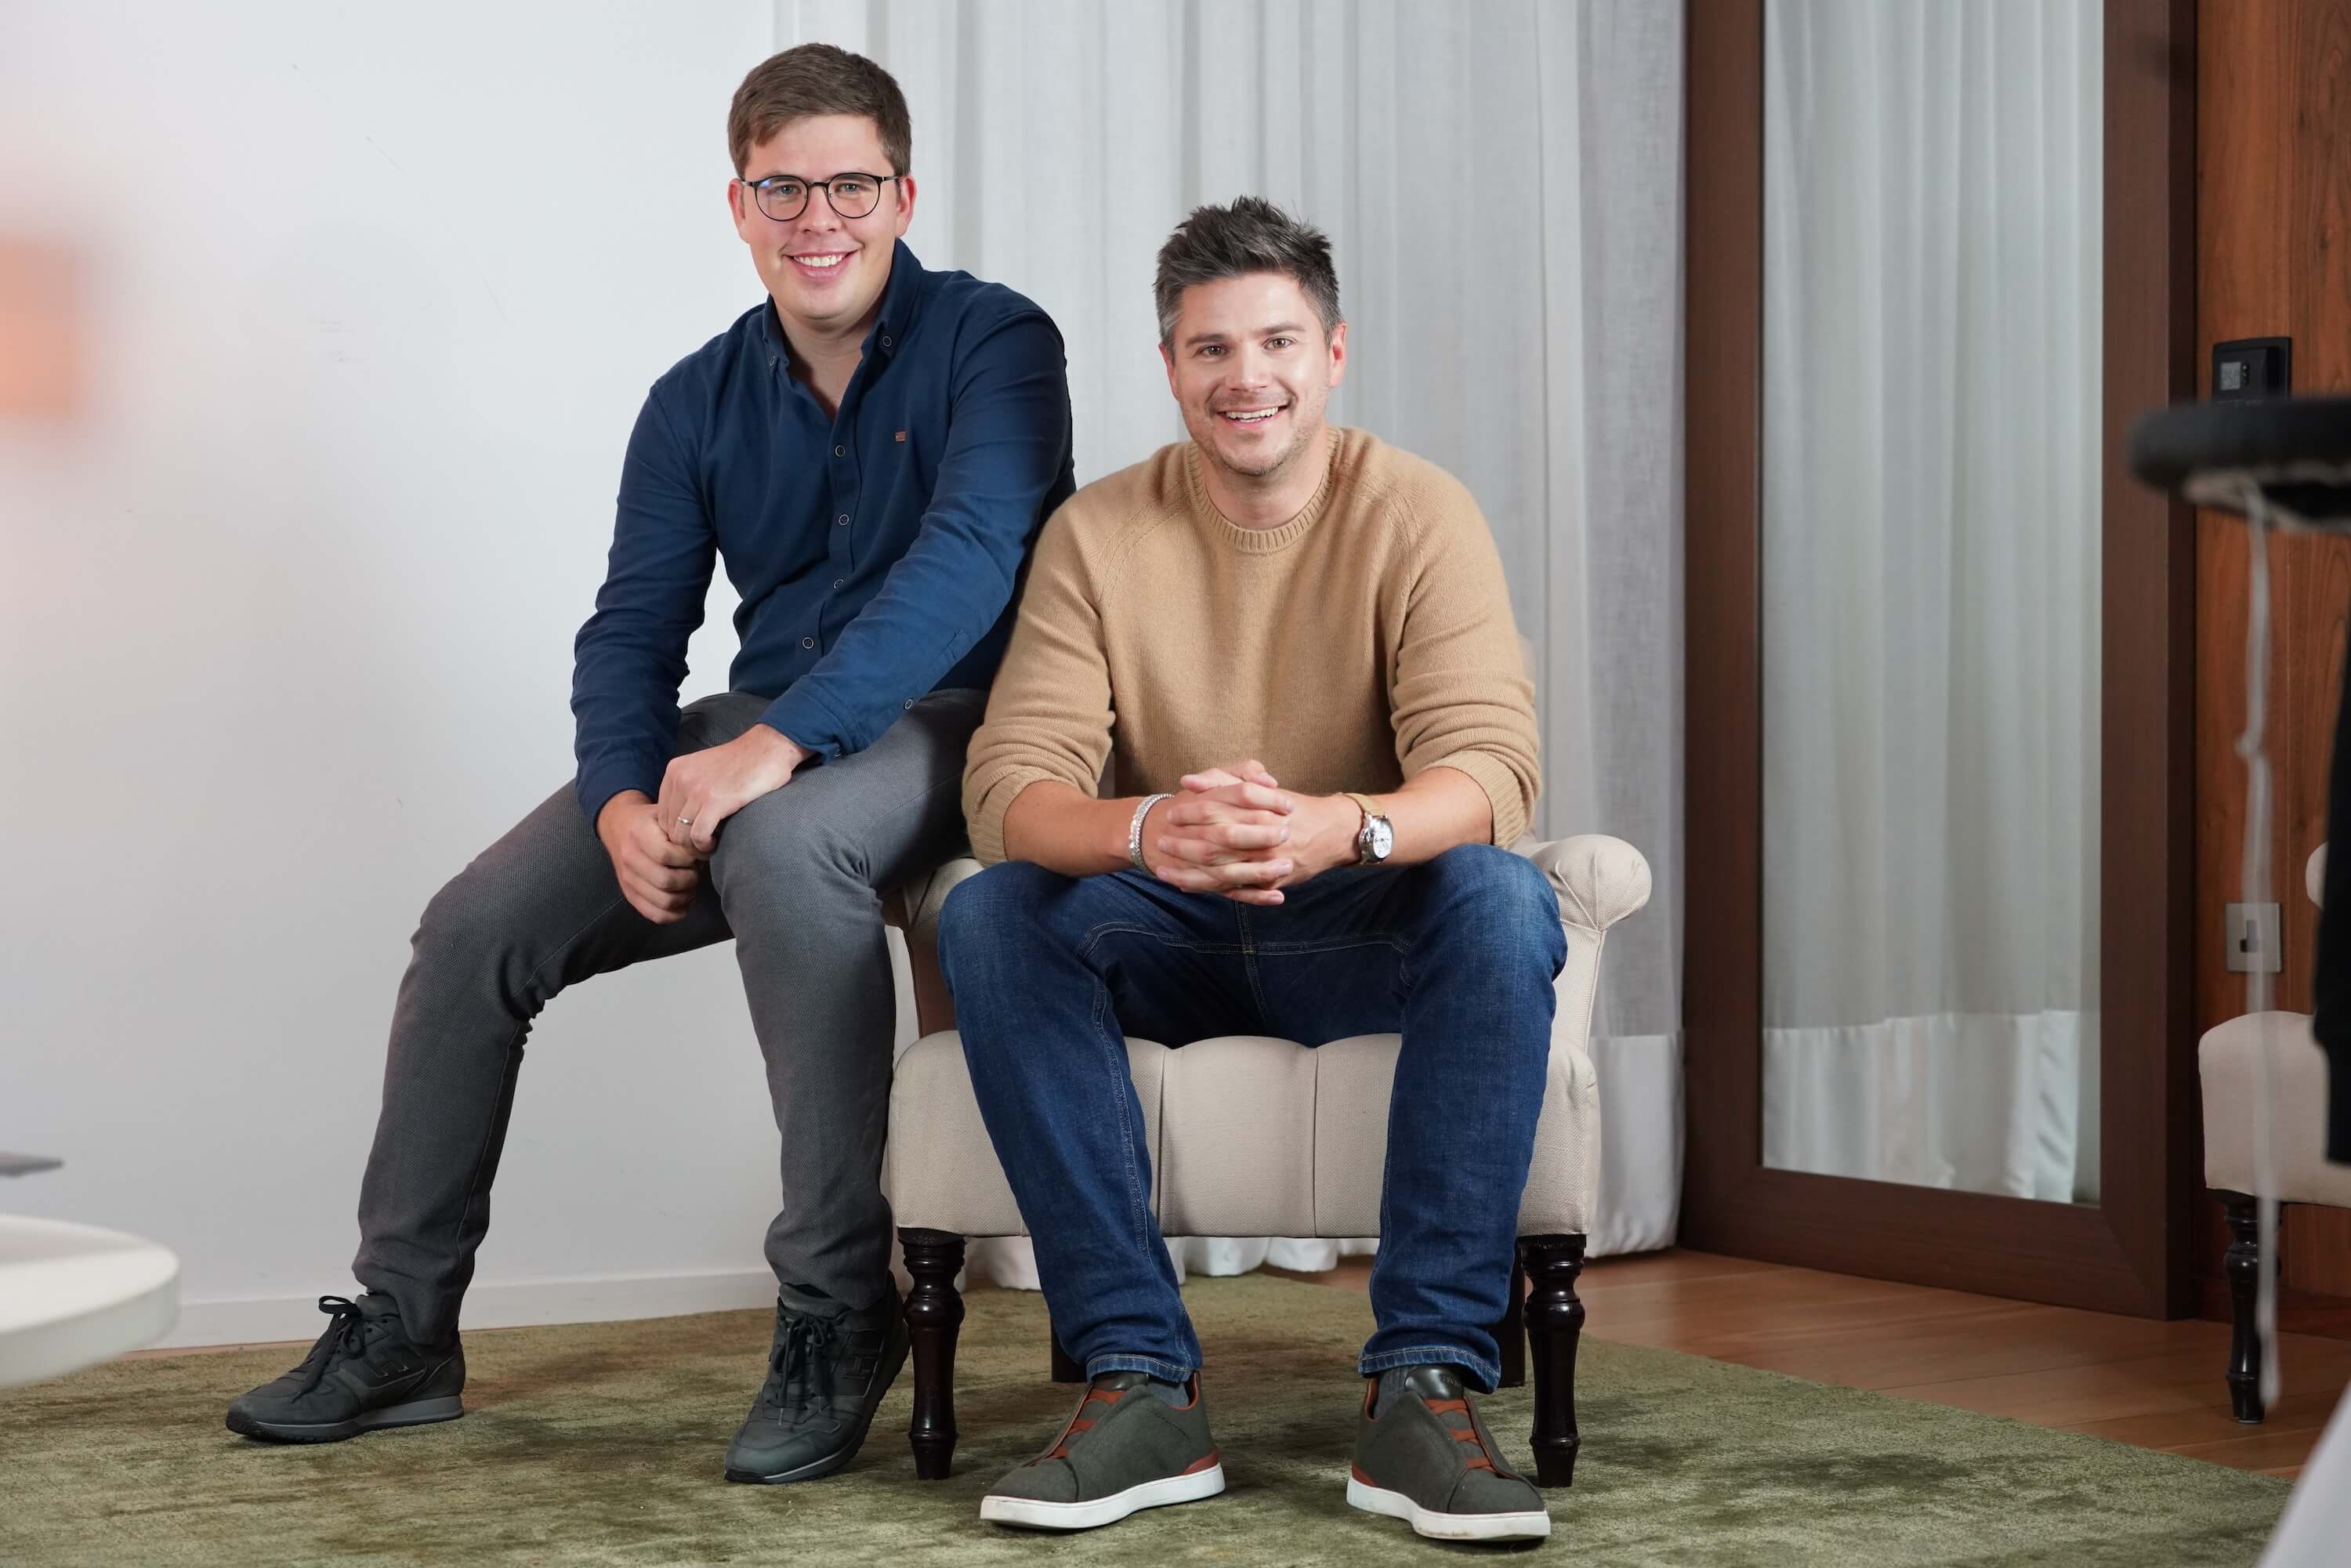 A picture of the current sequel team showing Alex Macdonald and Philipp Omenitsch, seated on a sofa together. Alex is seated on the chair itself, and Philipp is seated on the armrest to his left.